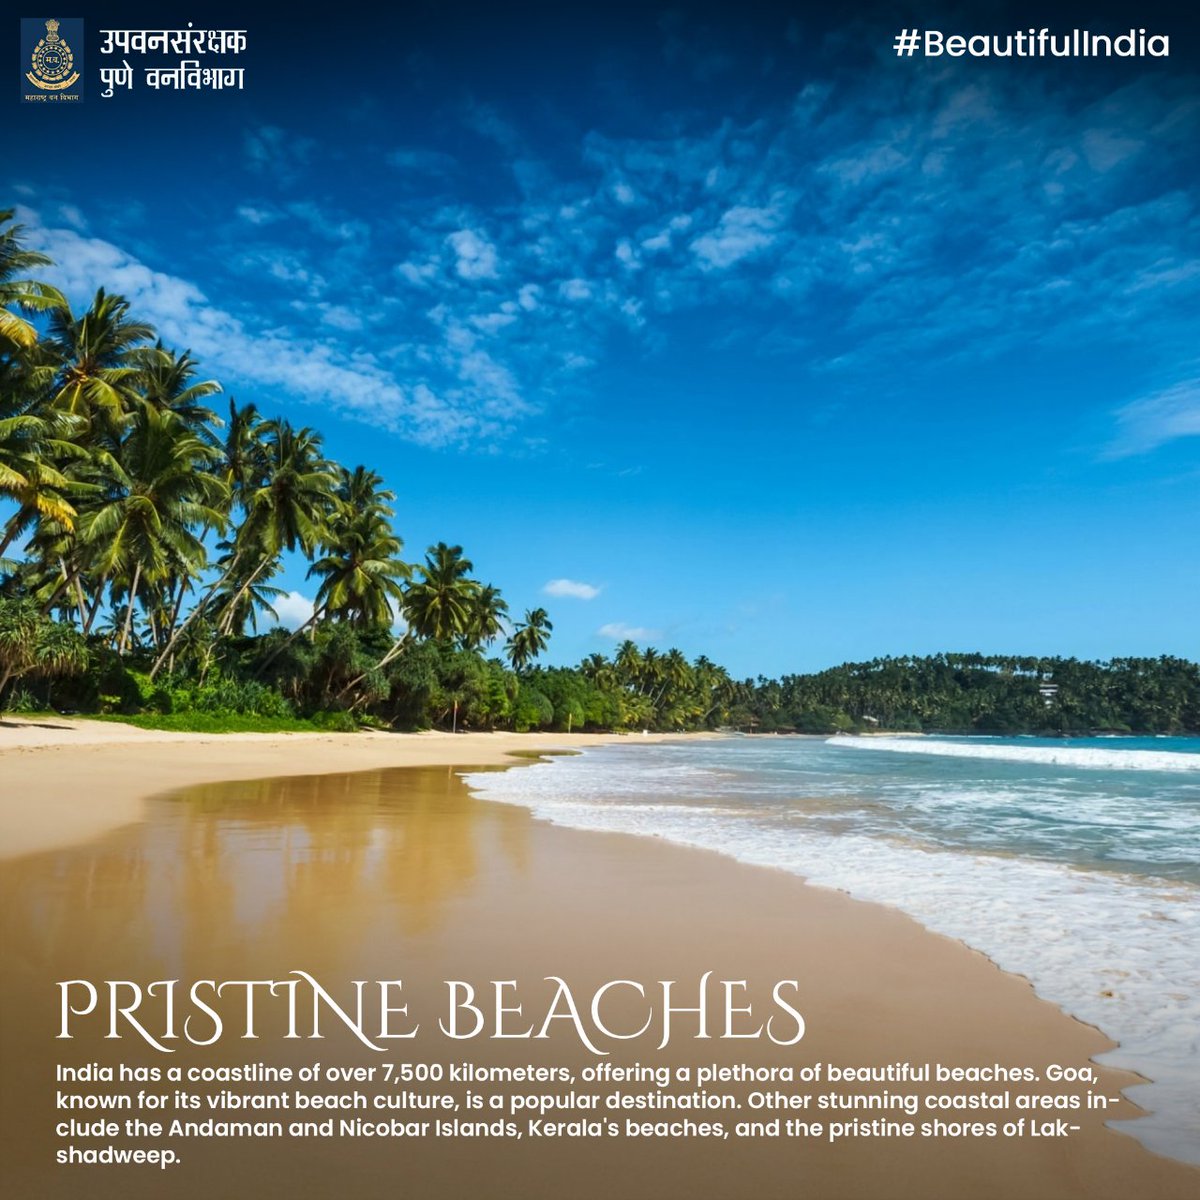 Do you know India has a coastline of over 7500kms ?
#BeautifulIndia
.
.
#ForestTerms #InterestingFacts #IFS #IndianForestService #Forest #Forests #Facts #explore #Forts #Informative #Maharashtra #India #Beautiful